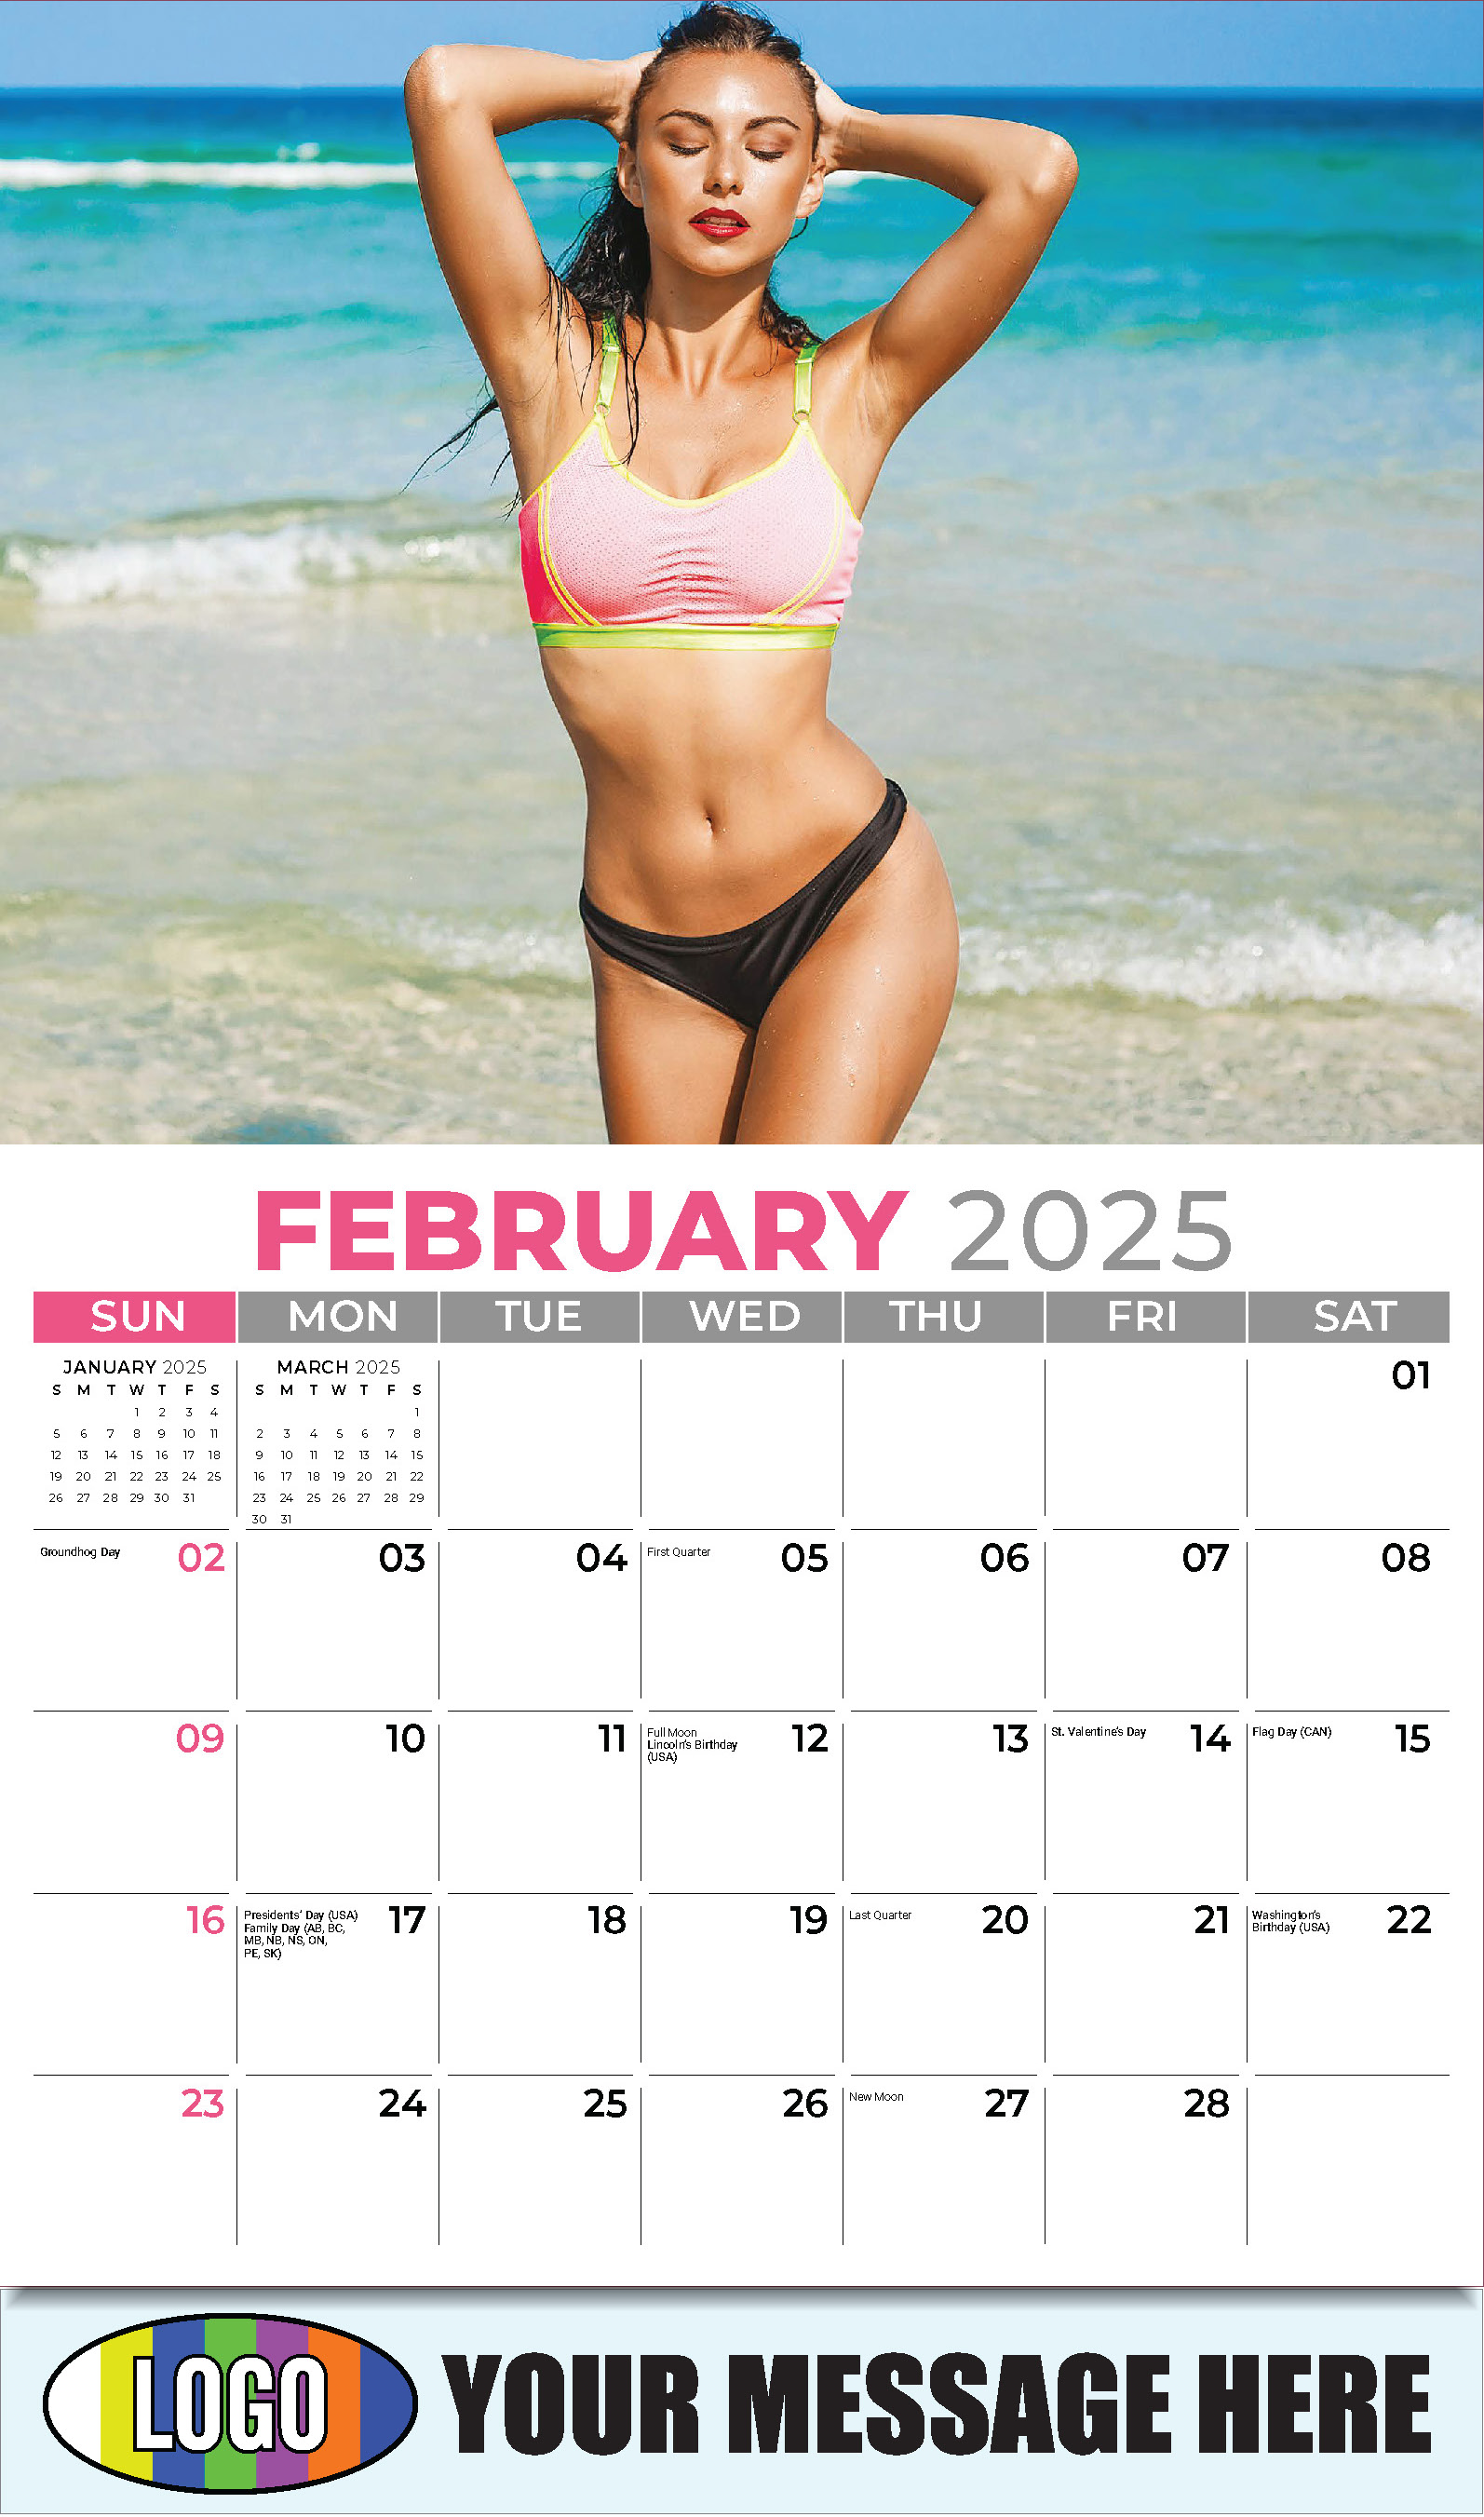 Swimsuits 2025 Business Promotional Wall Calendar - February